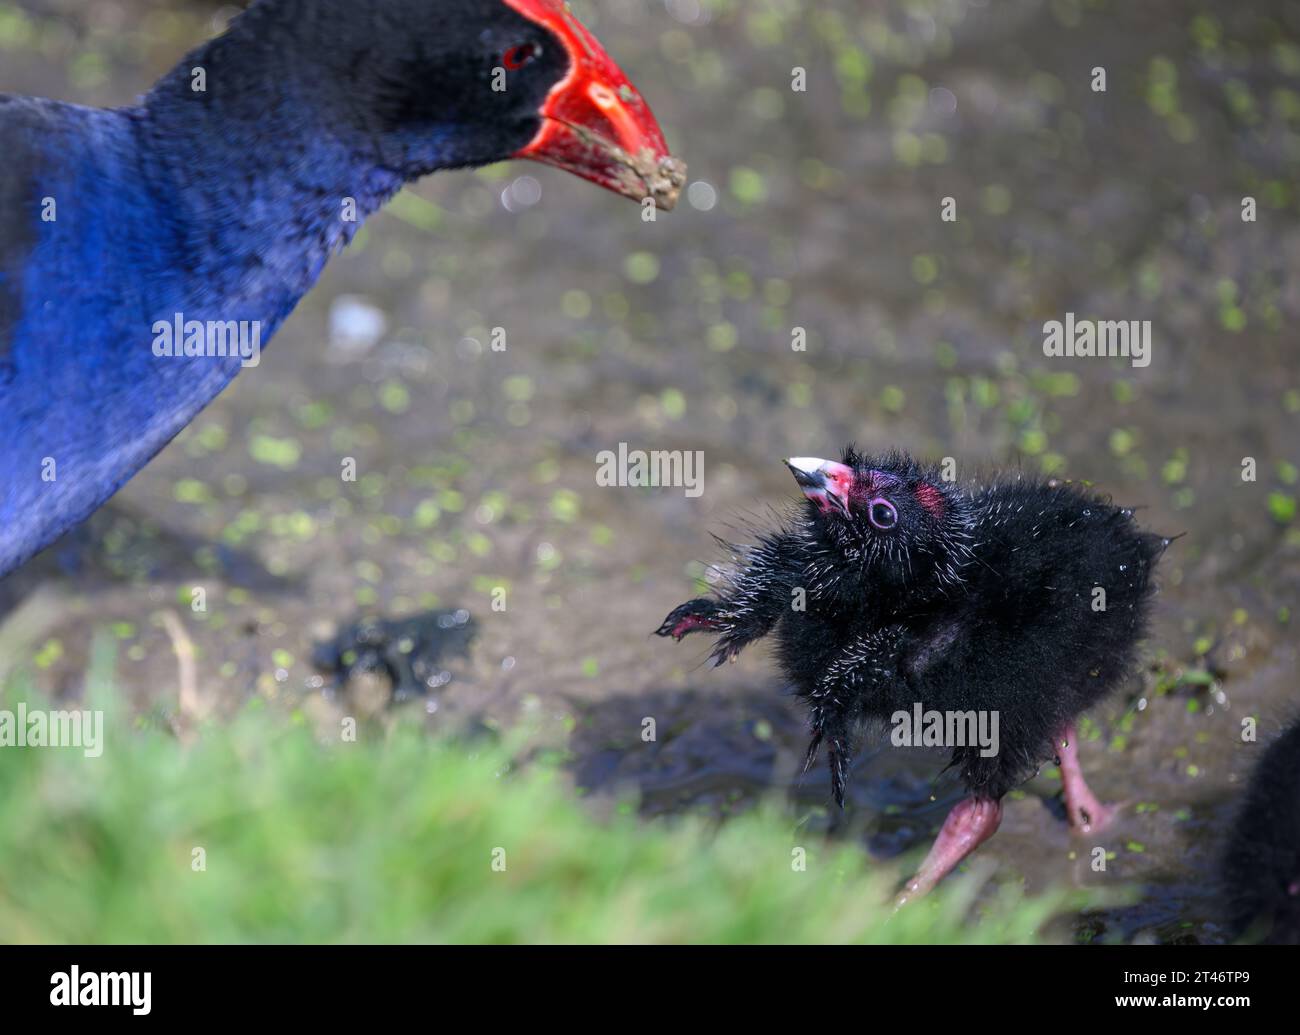 Baby Pukeko bird flapping its wings, looking up at mother Pukeko. Western Springs park, Auckland. Stock Photo